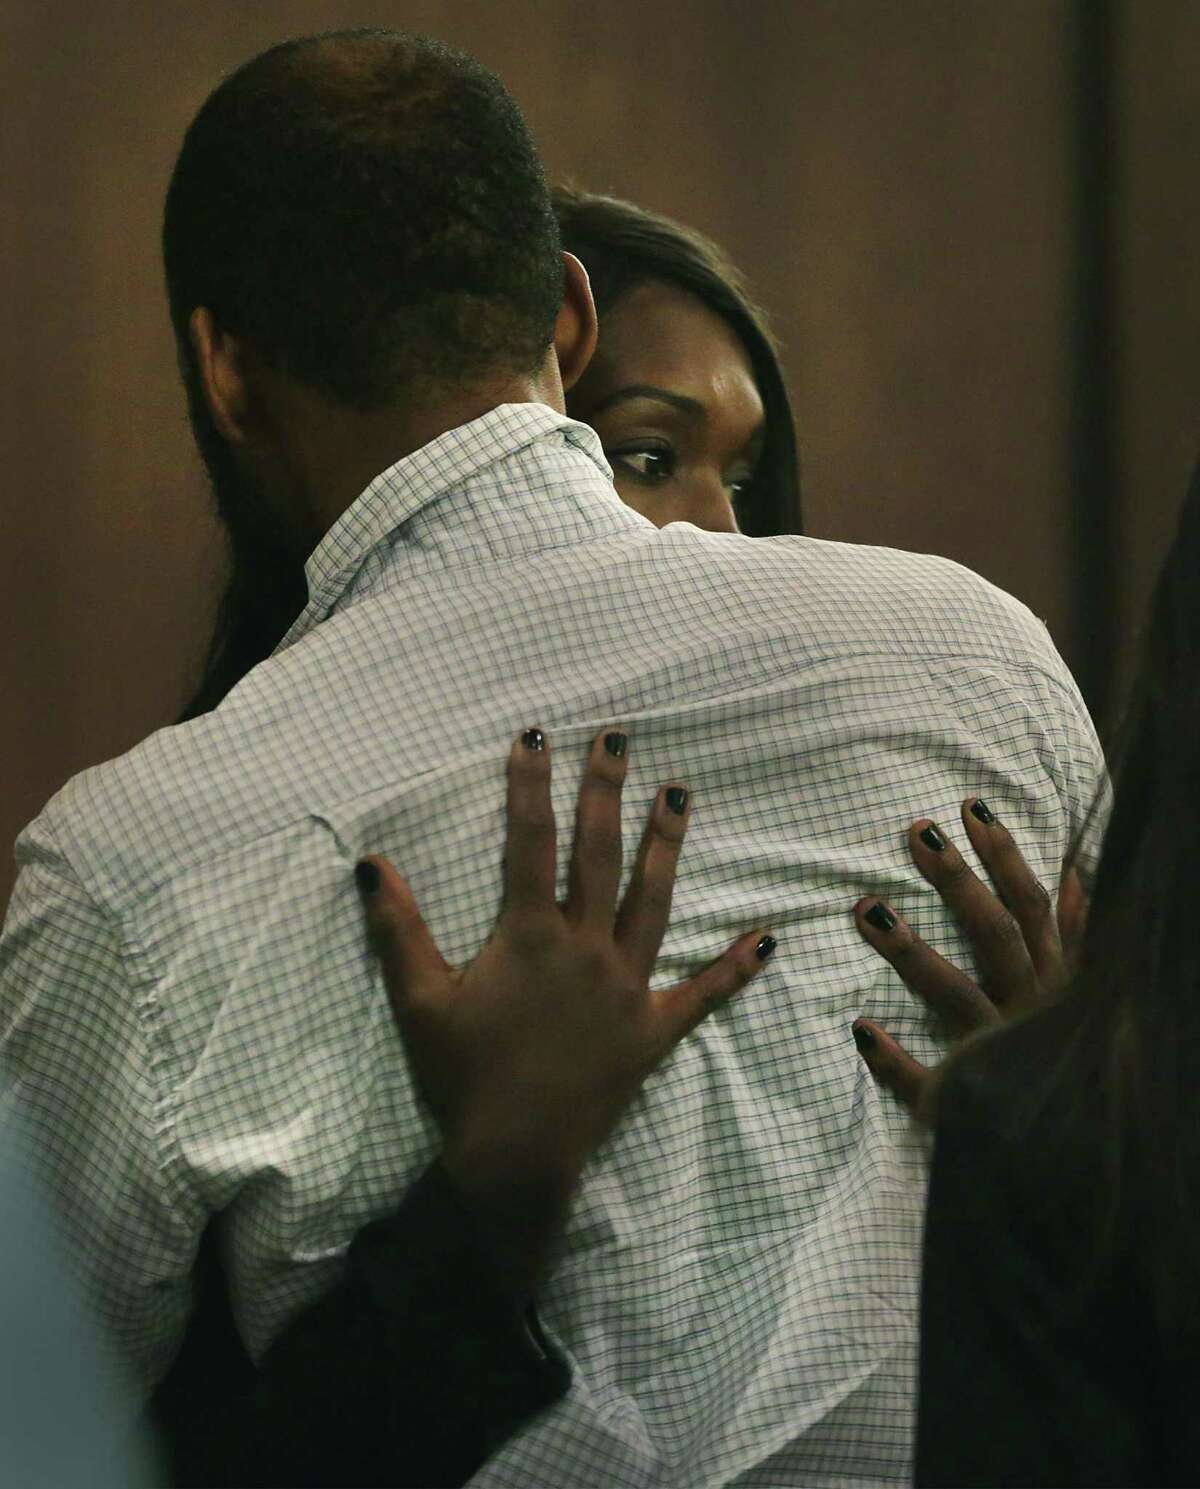 Marquita Johnson, right, embraces her husband Qwalion Busby, left, after being found guilty of injury to a child by omission in regard to their son, who died after a severe infection in 2015 appear in the Cadena-Reeves Justice Center, on Tuesday, Feb. 14, 2017.